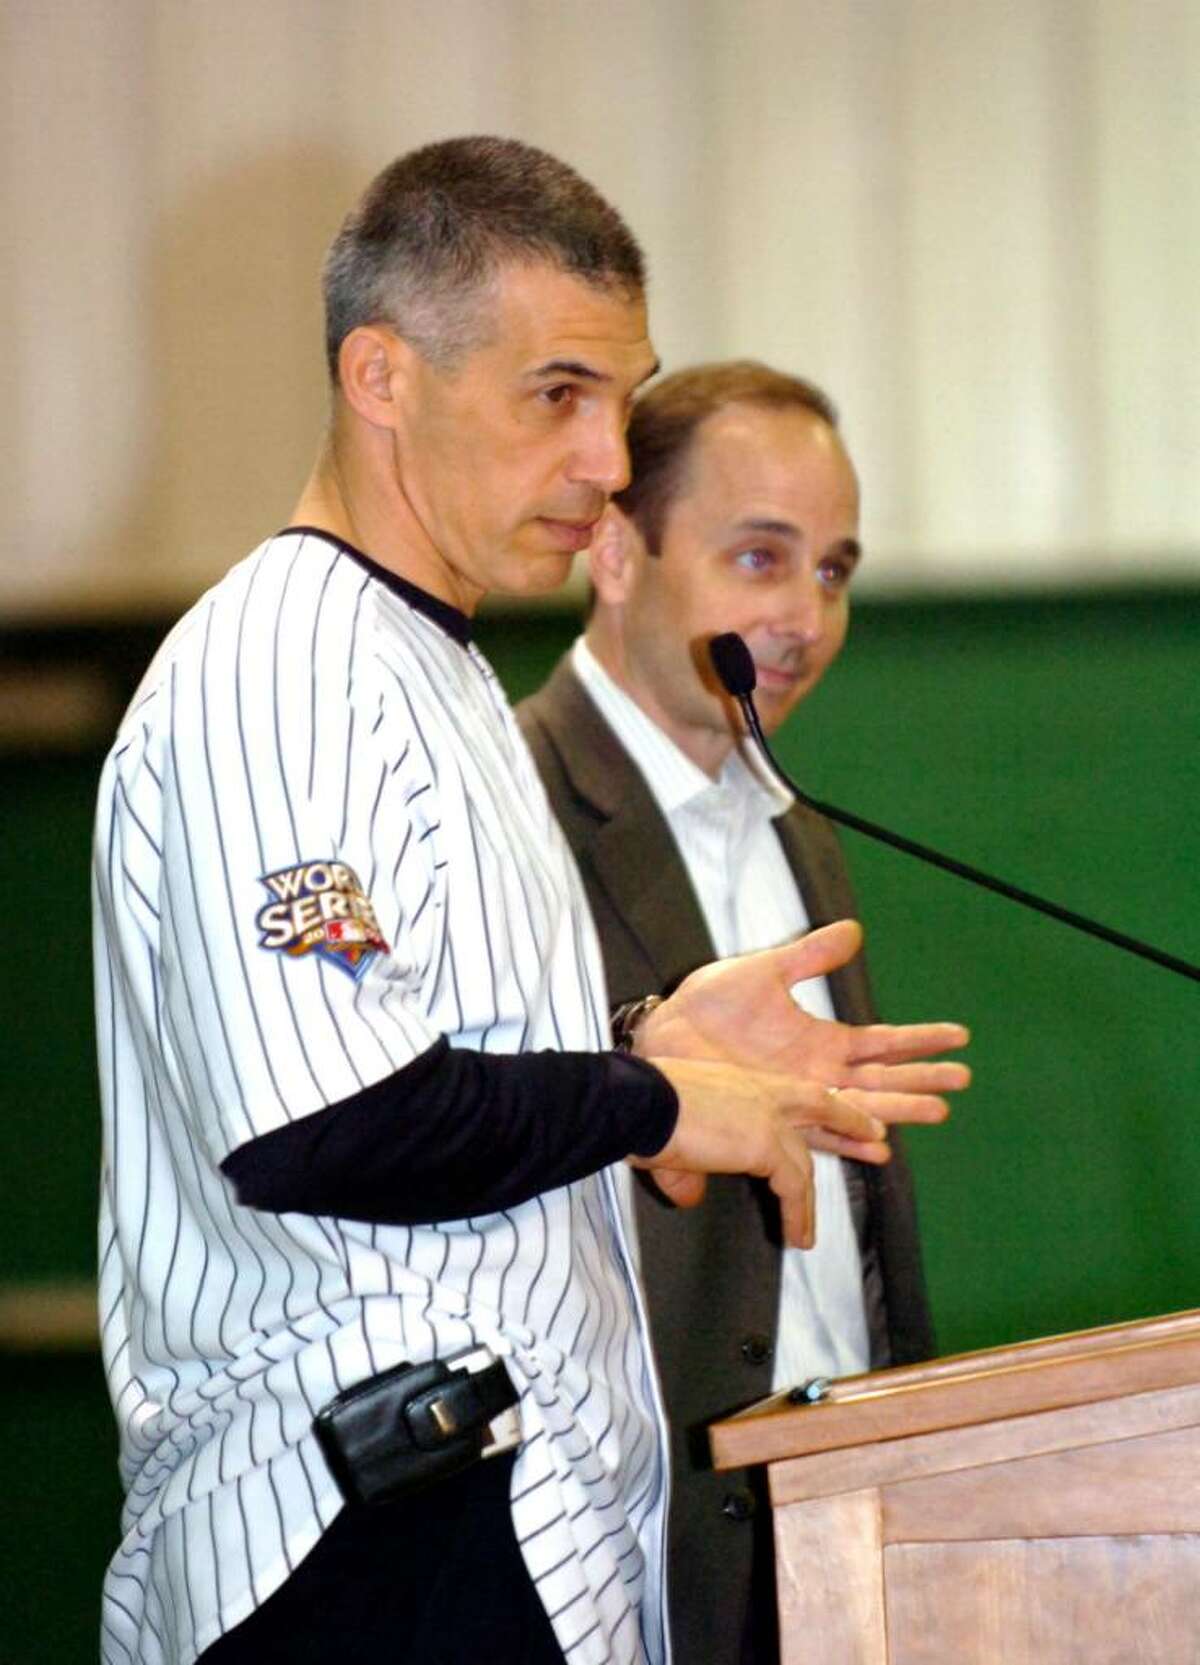 New York Yankees' Manager Joe Girardi and general manager Brian Cashman speak the Convent of the Sacred Heart's celebration of the Yankees 2009 World Series championship on January 26, 2010.